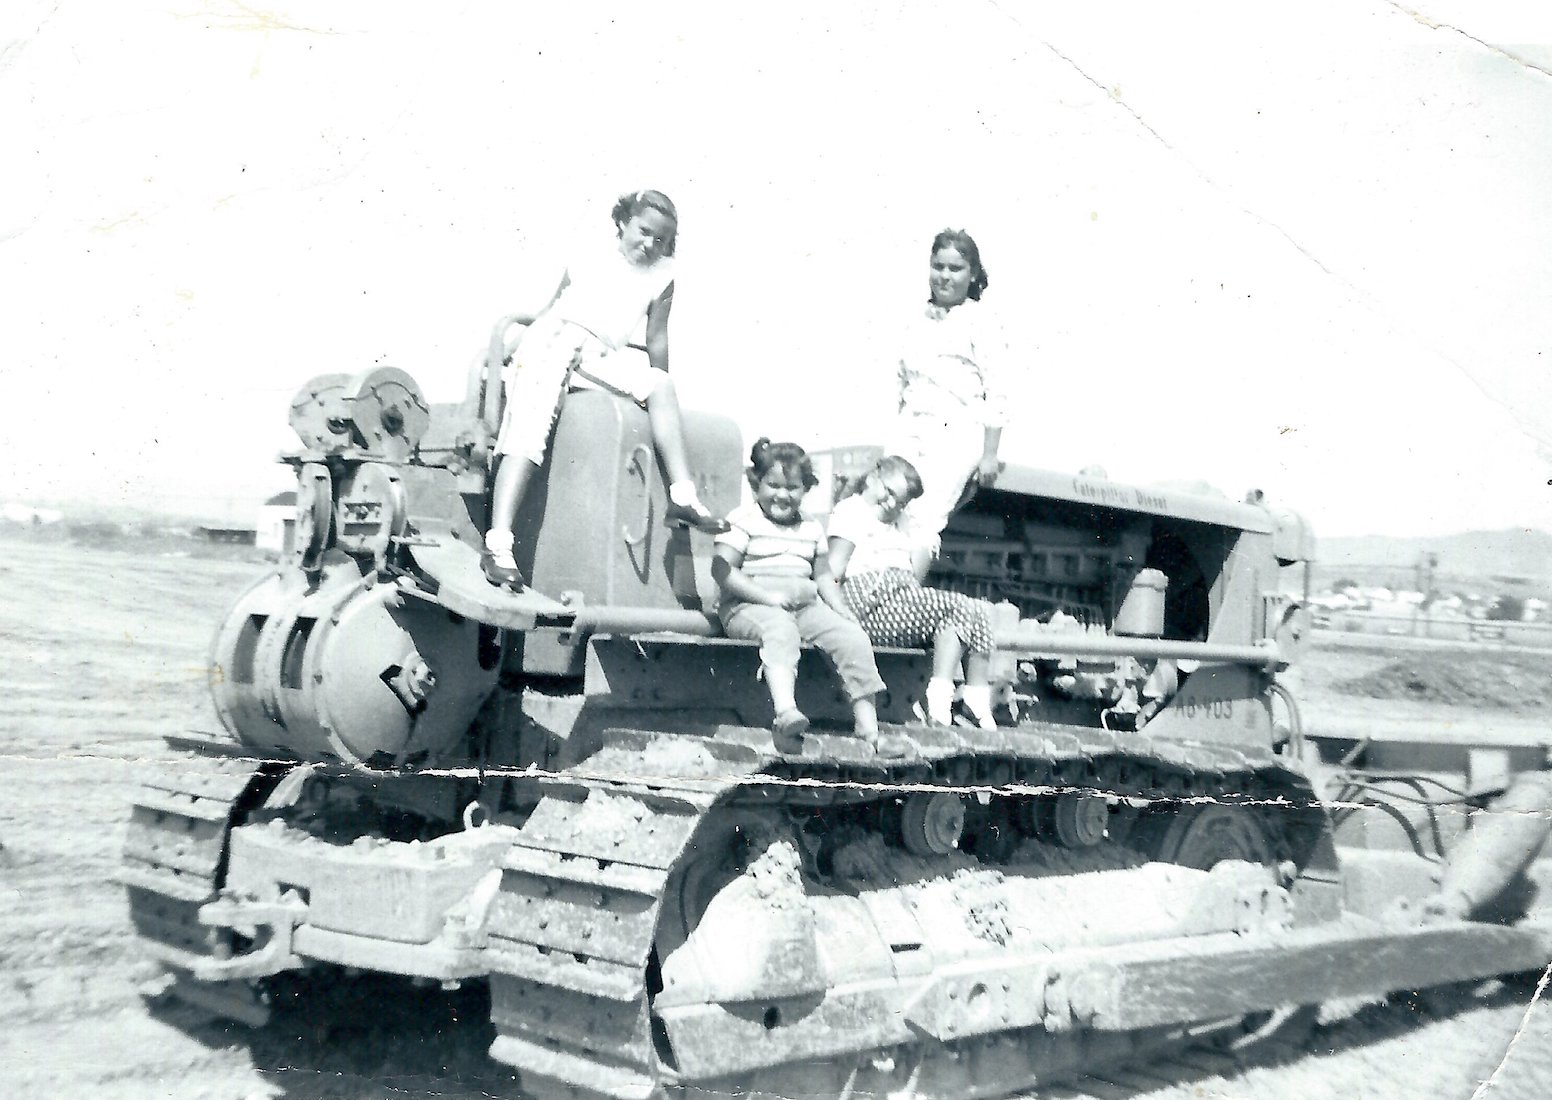 Lani with her sisters Vickie, Bobby, and Kathy sitting on their dad’s tractor, 1955.